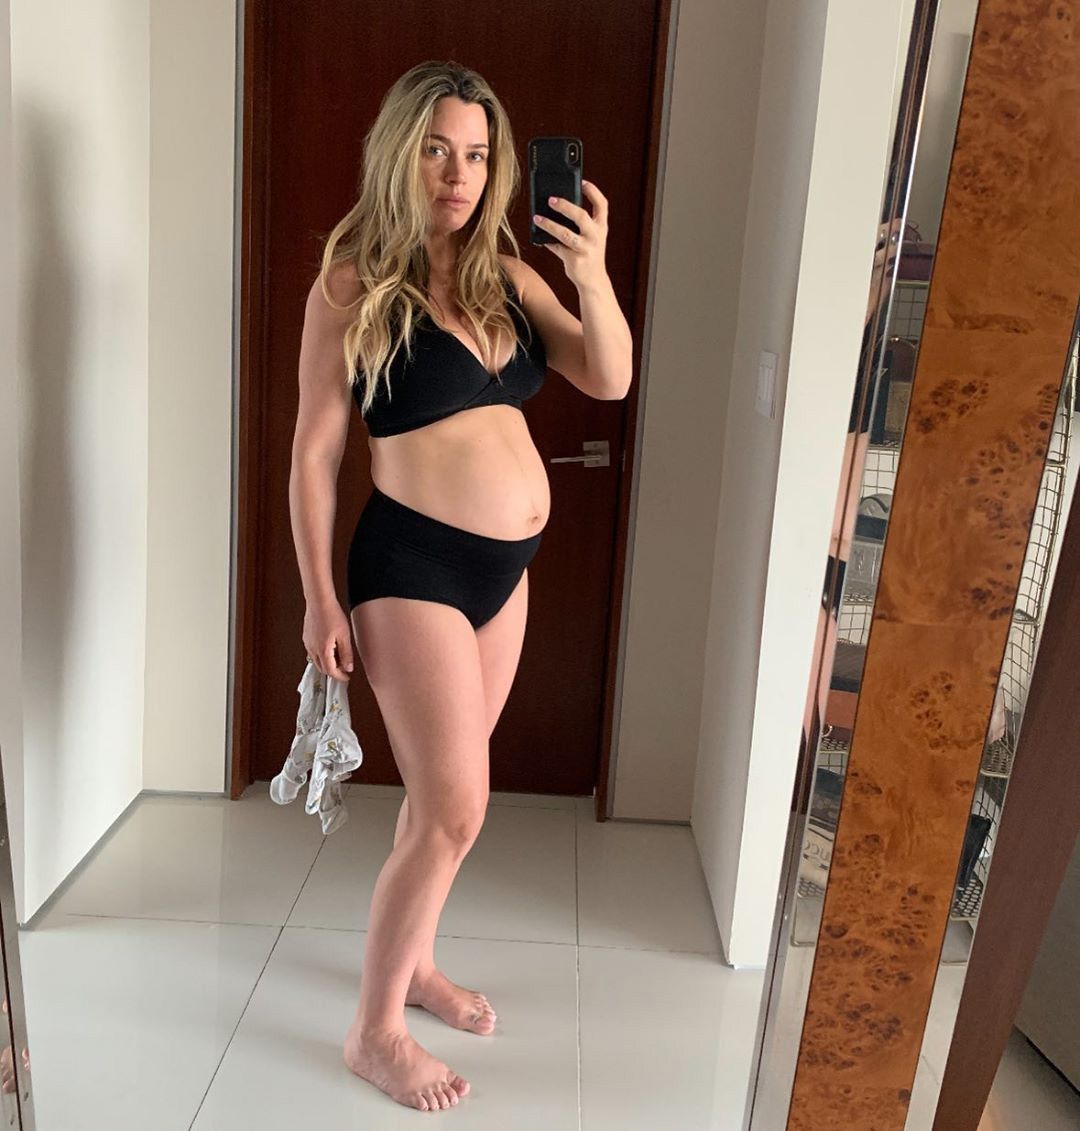 Teddi Mellencamp Arroyave Shares Her &lsquo;Postpartum Reality&rsquo; 3 Days After Welcoming Daughter